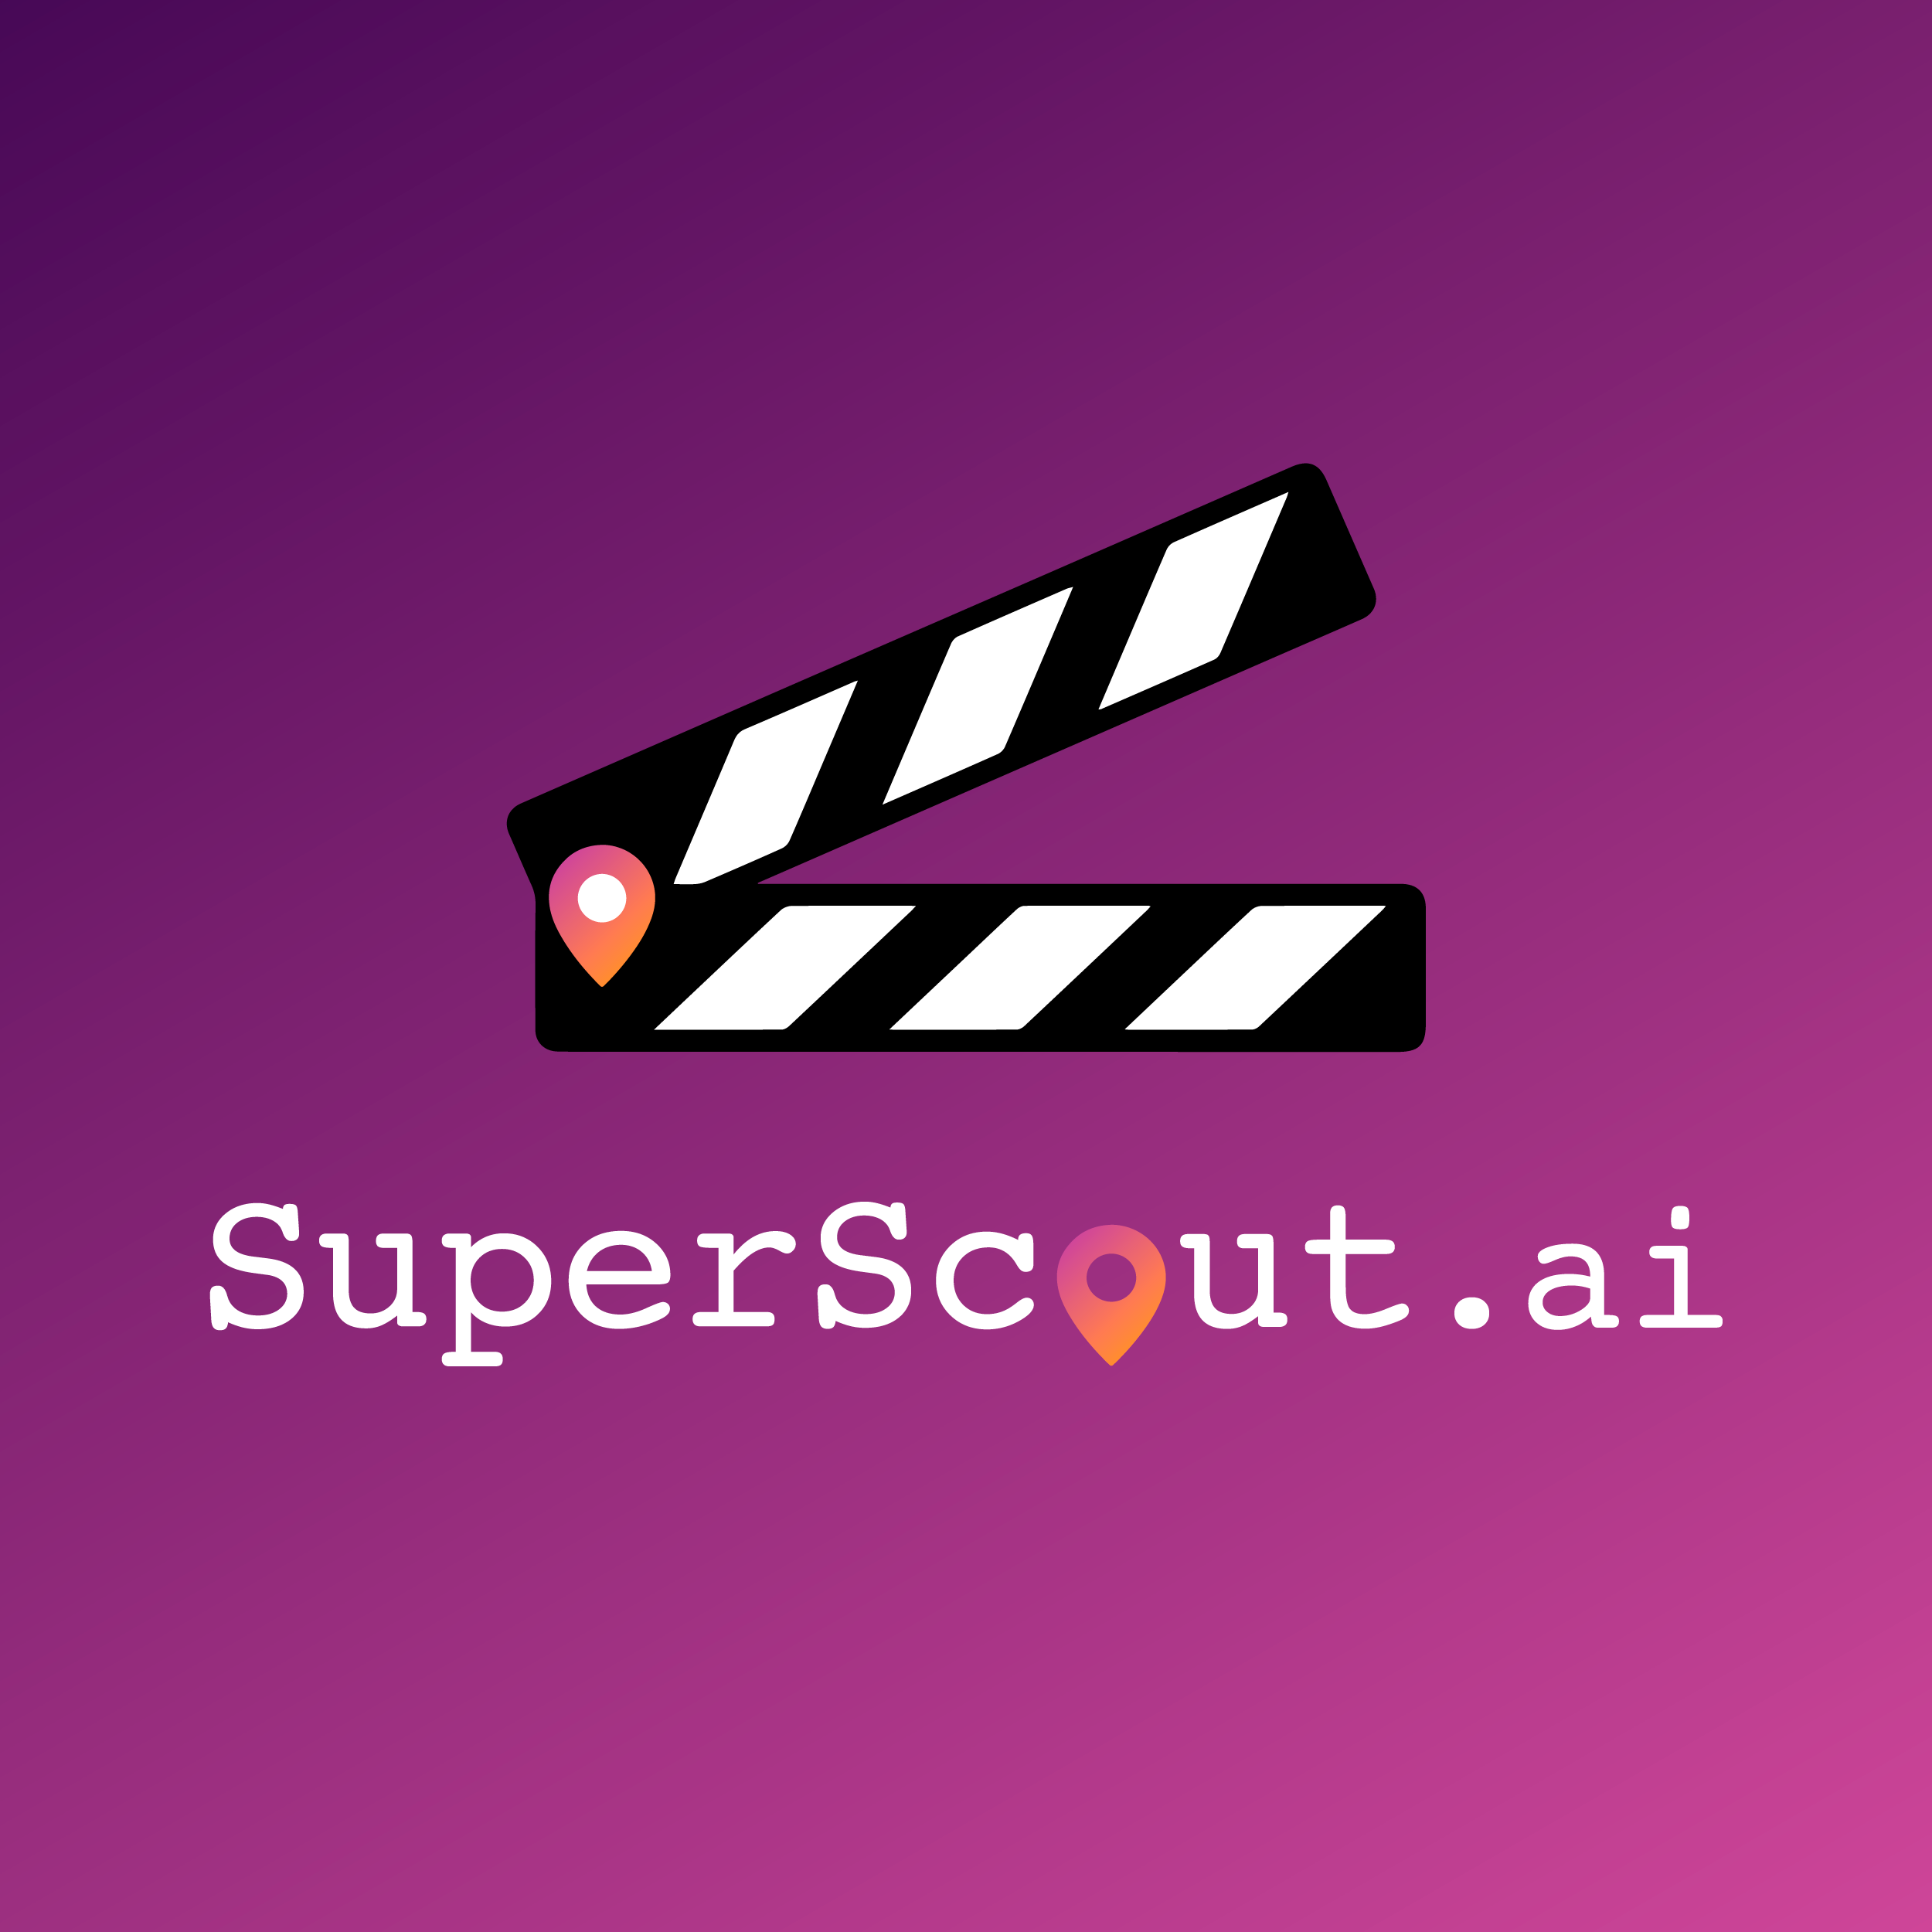 An image of SuperScout's logo, displaying a clapper board.